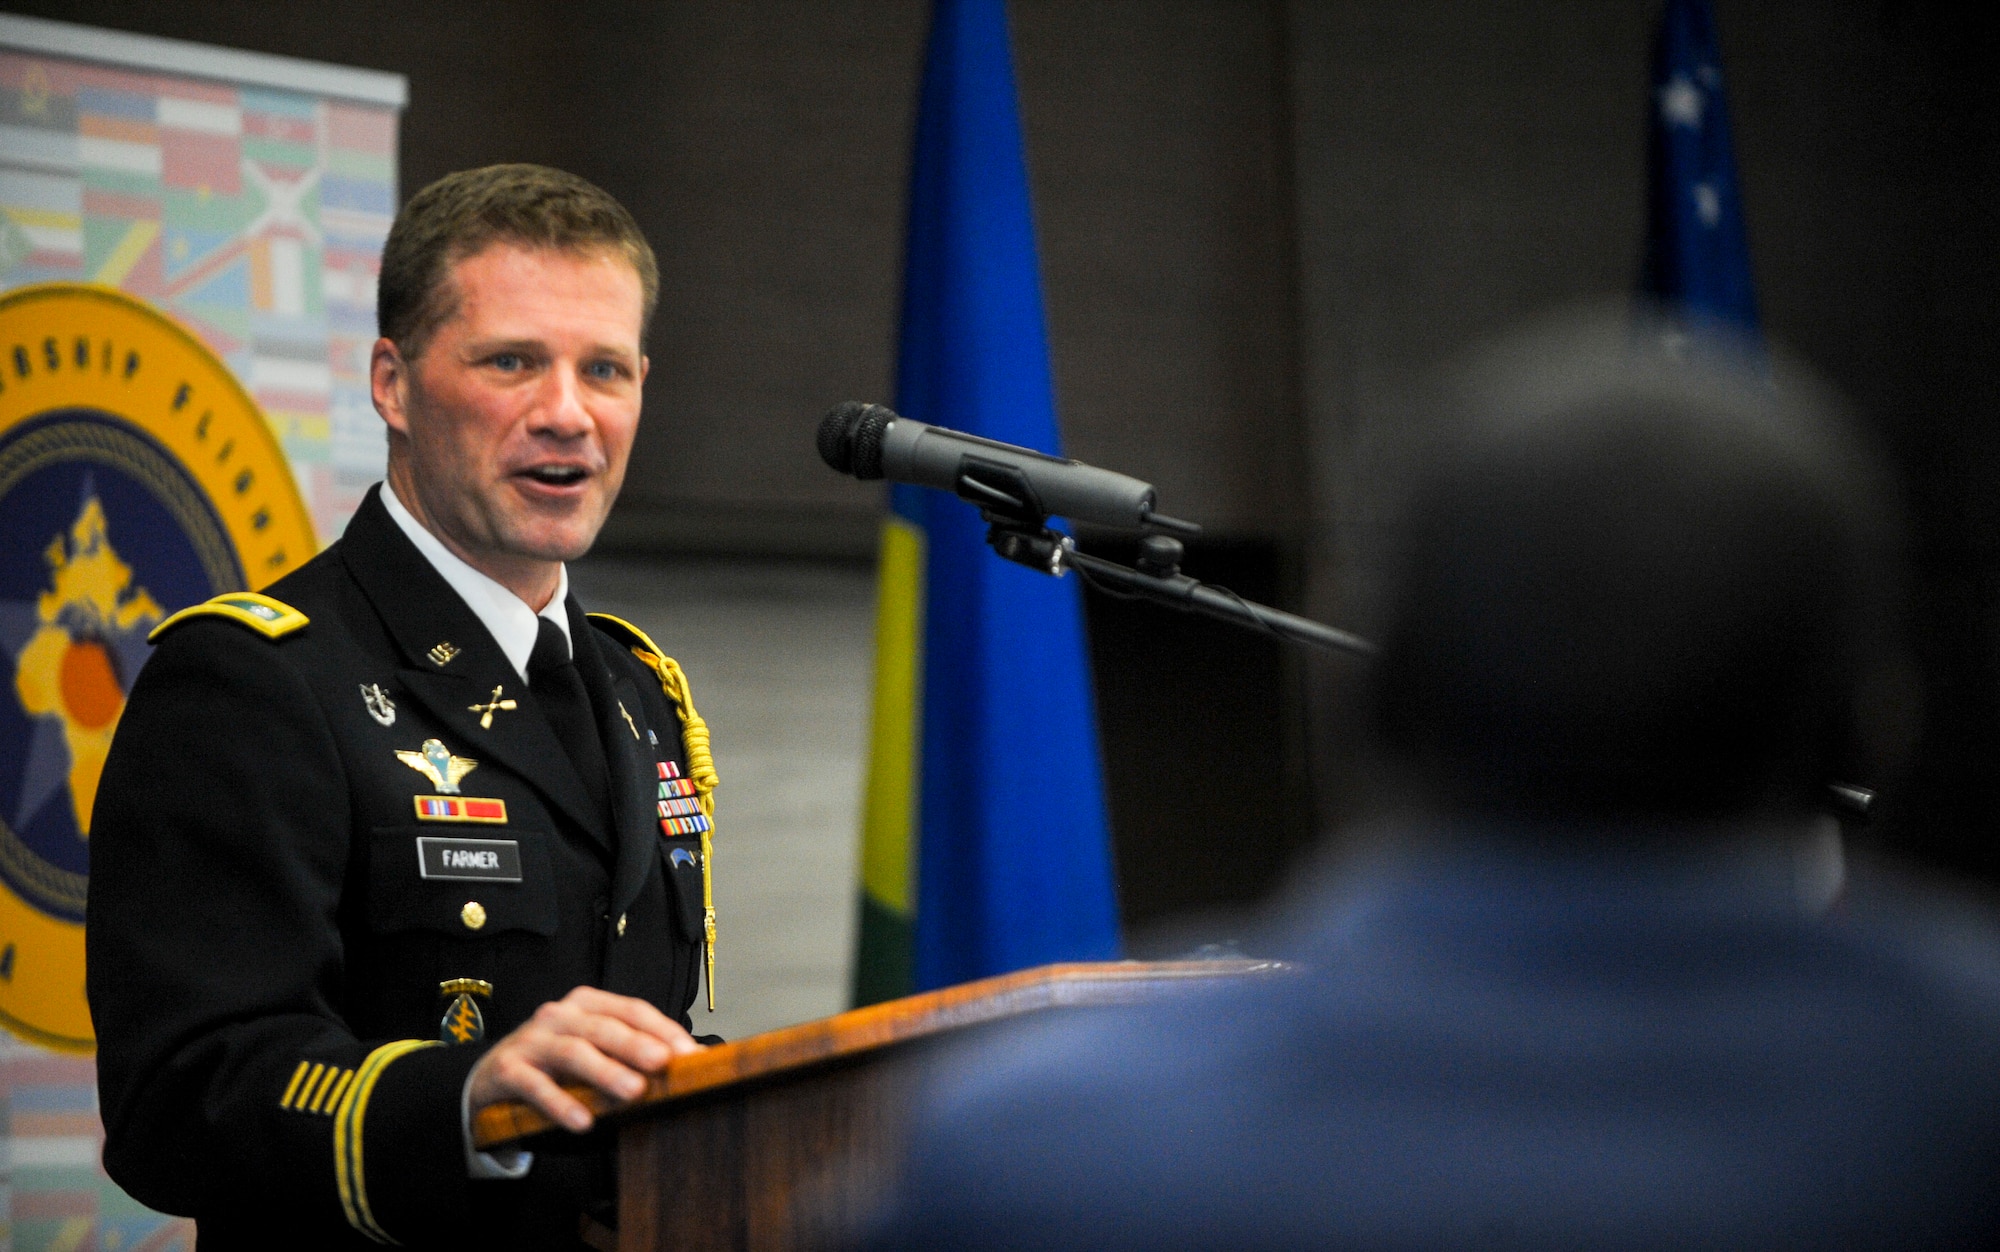 U.S. Army Lt. Col. Jason Farmer, Defence Attaché at the U.S. Embassy in Kigali, gives remarks during the African Partnership Flight Rwanda opening ceremony in Kigali, Rwanda, March 4, 2019. APF Rwanda's focus is on sharing best practices for flight, ground, and weapon safety. APF Rwanda participants include military representatives from Rwanda, the United States, Cameroon, Ghana, Senegal, and Zambia. (U.S. Air Force photo by Tech. Sgt. Timothy Moore)